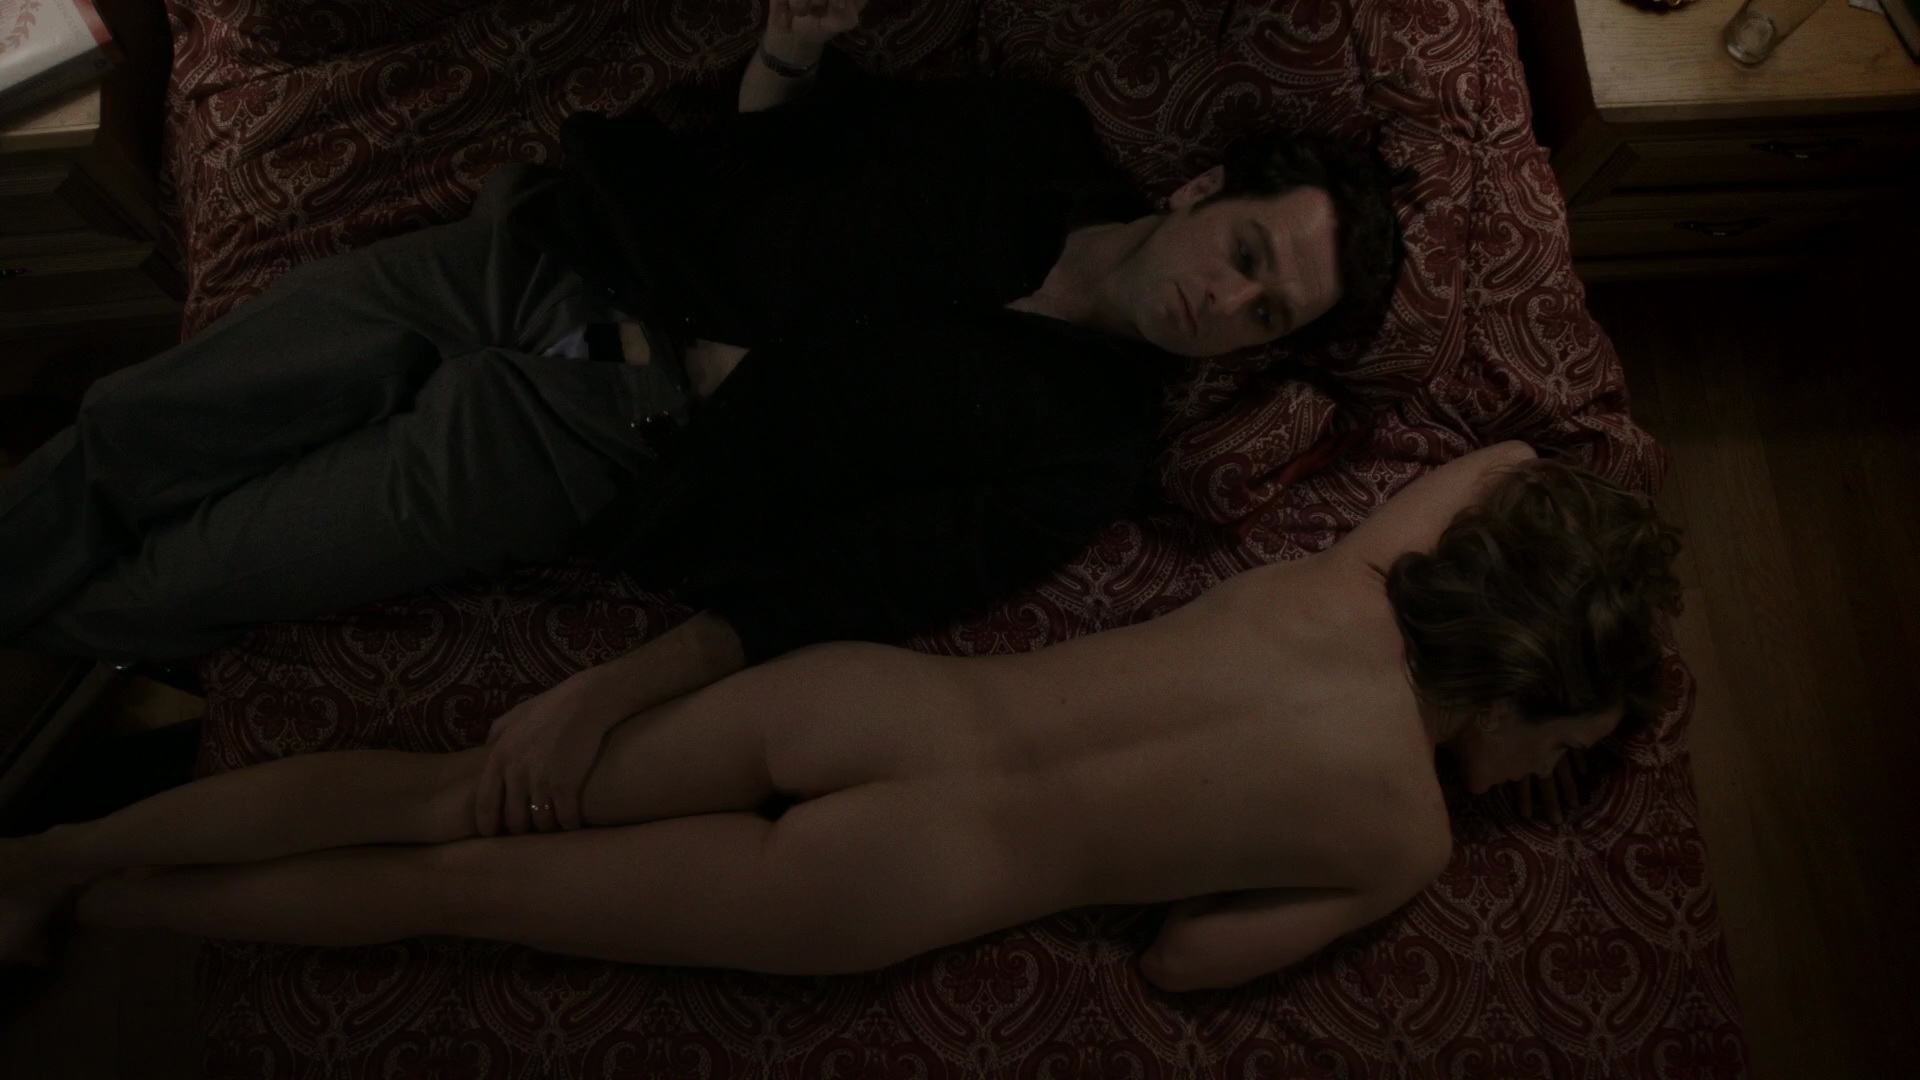 Keri Russell - The Americans s02e06 (2014) HD 1080p